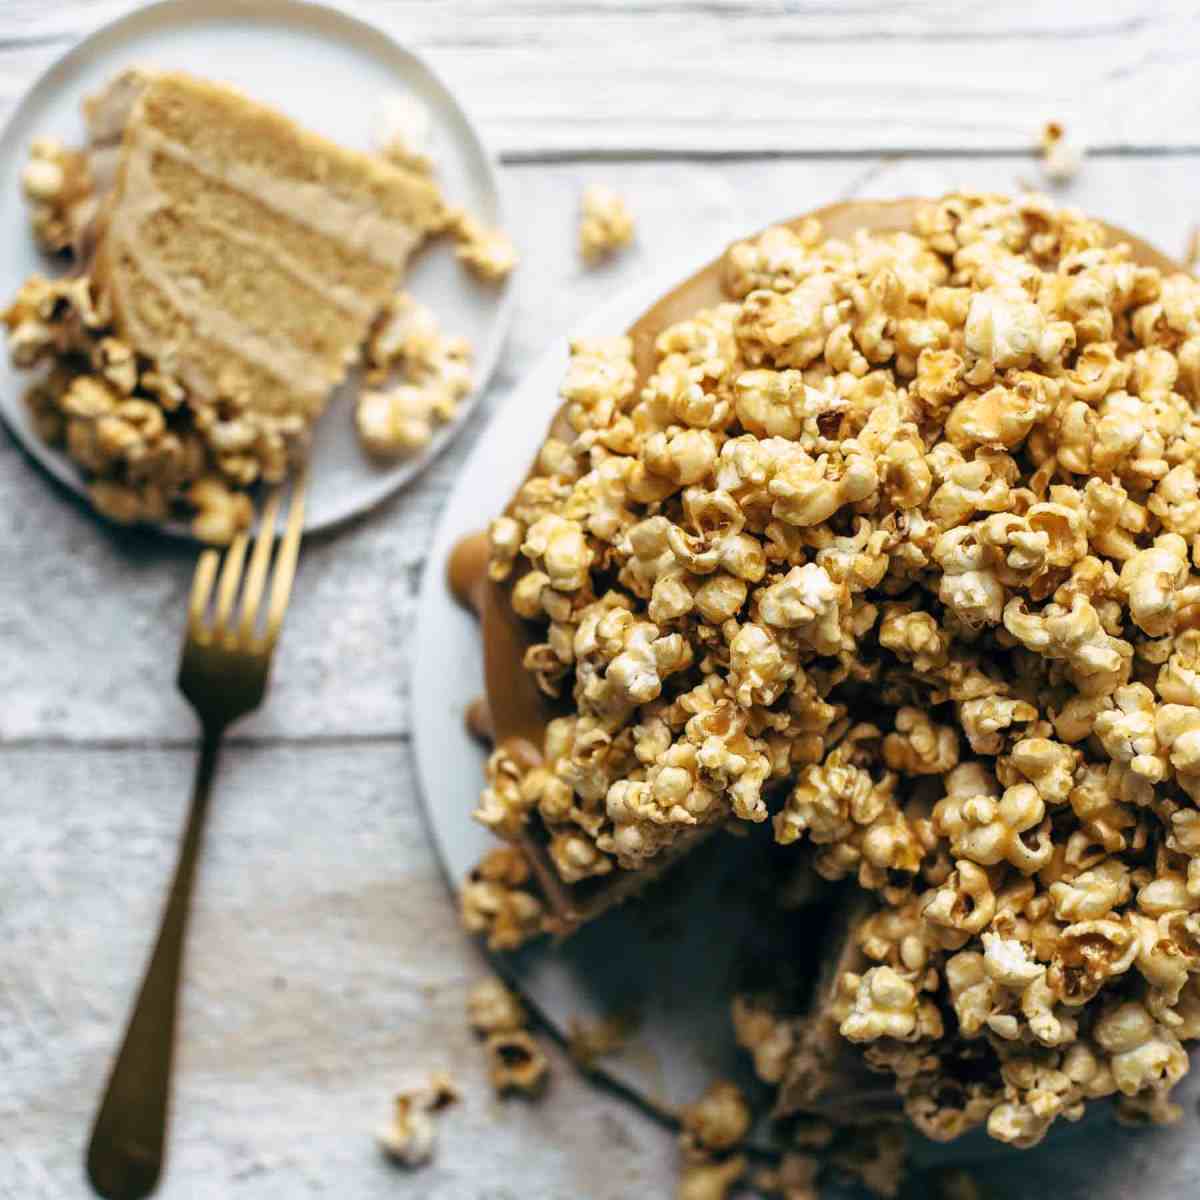 Top view shot of a cake topped with loads of caramel coated popcorn